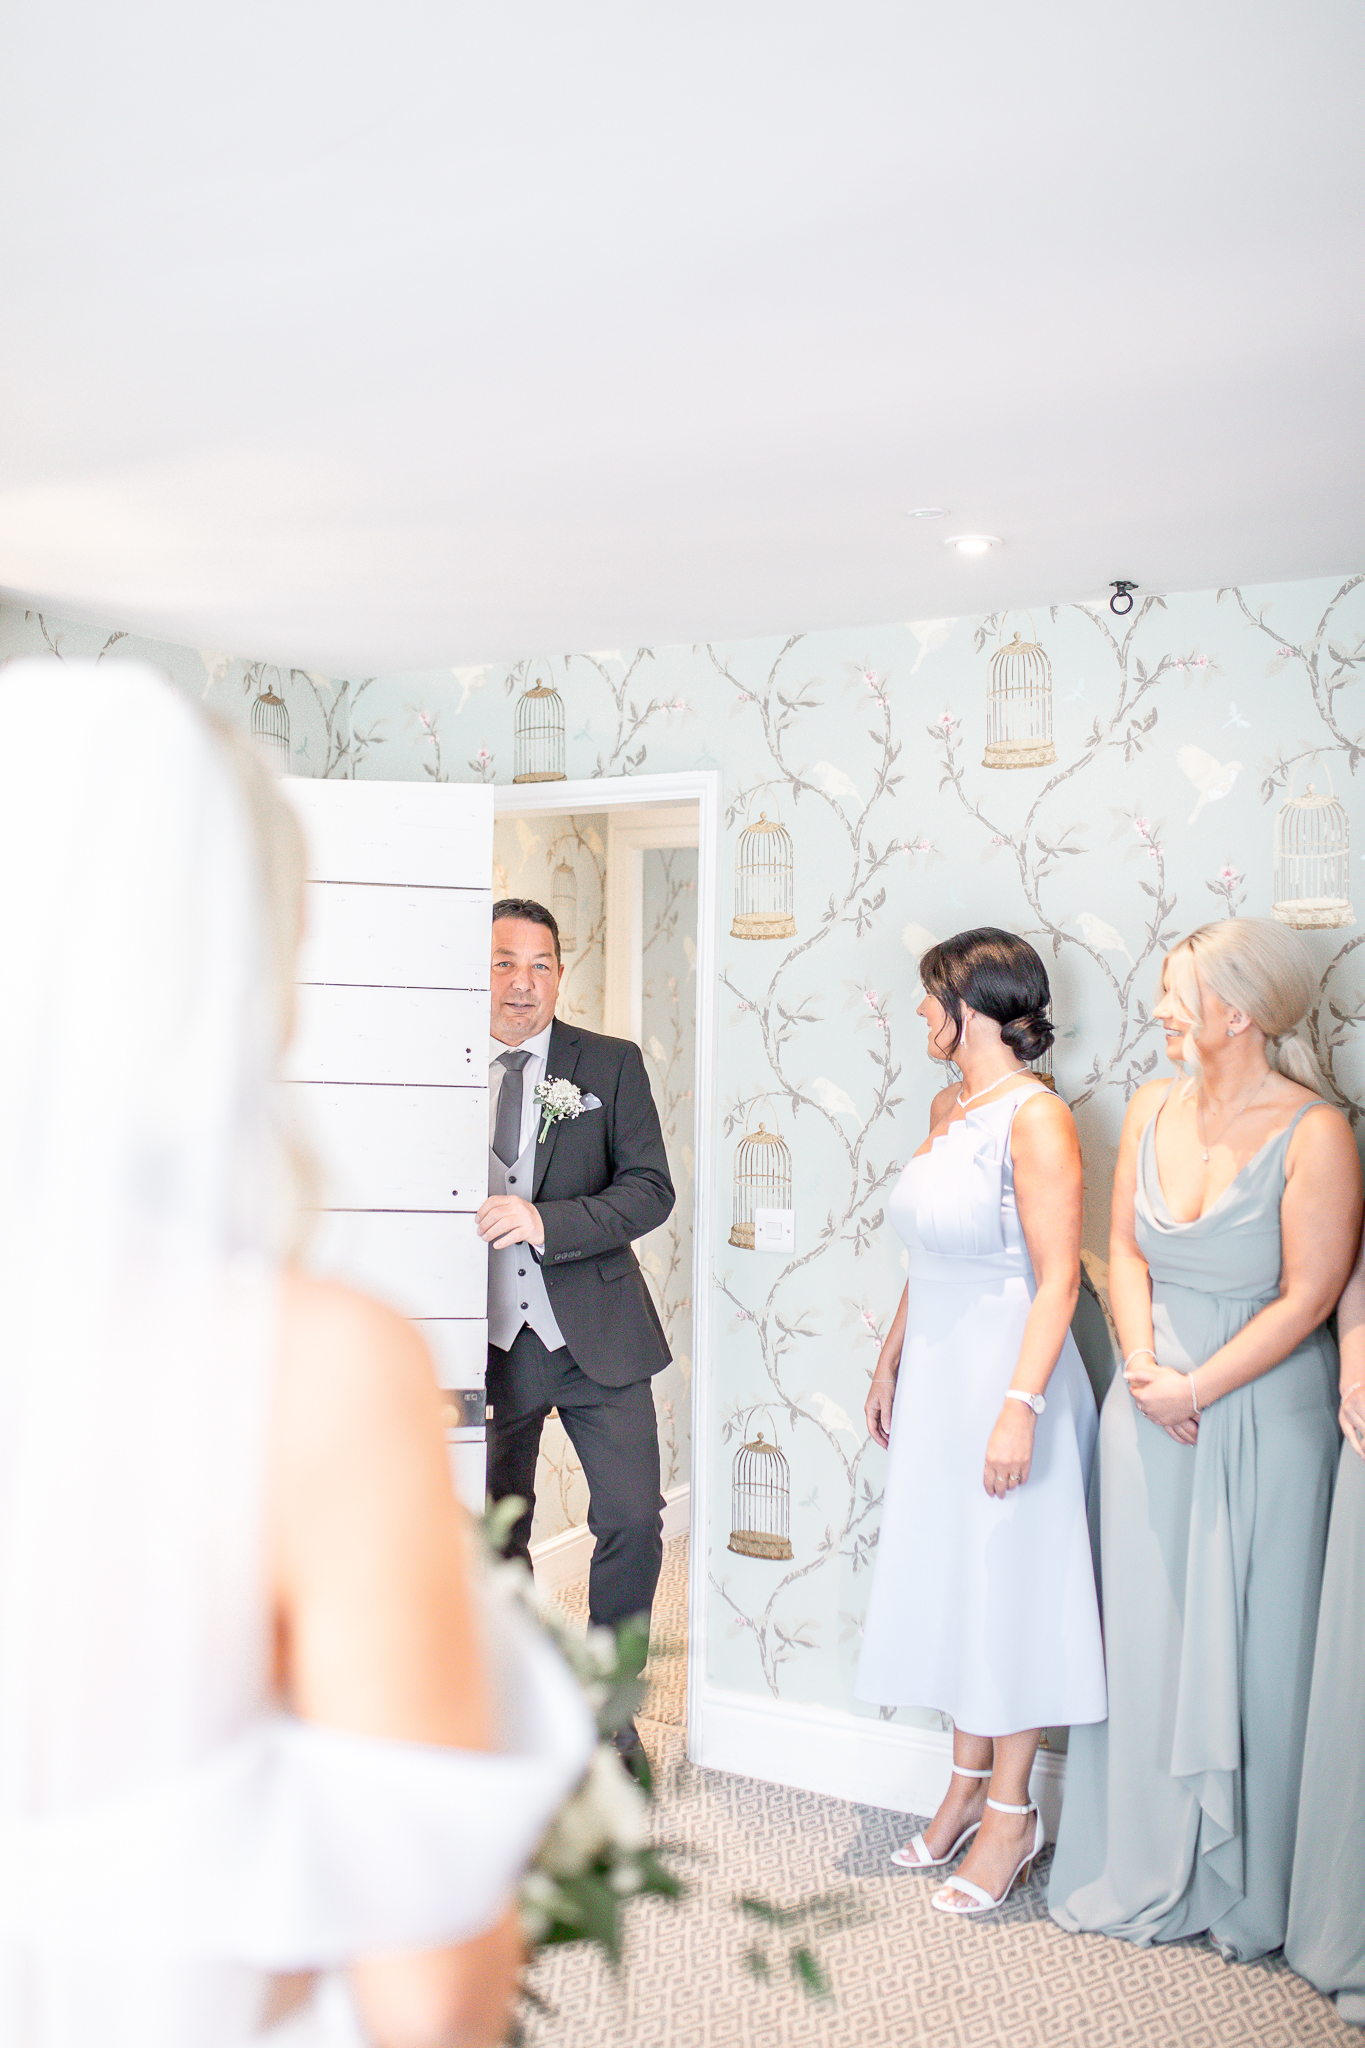 Father of the bride walking into the bridal suit to see the bride for the first time at North West wedding venue